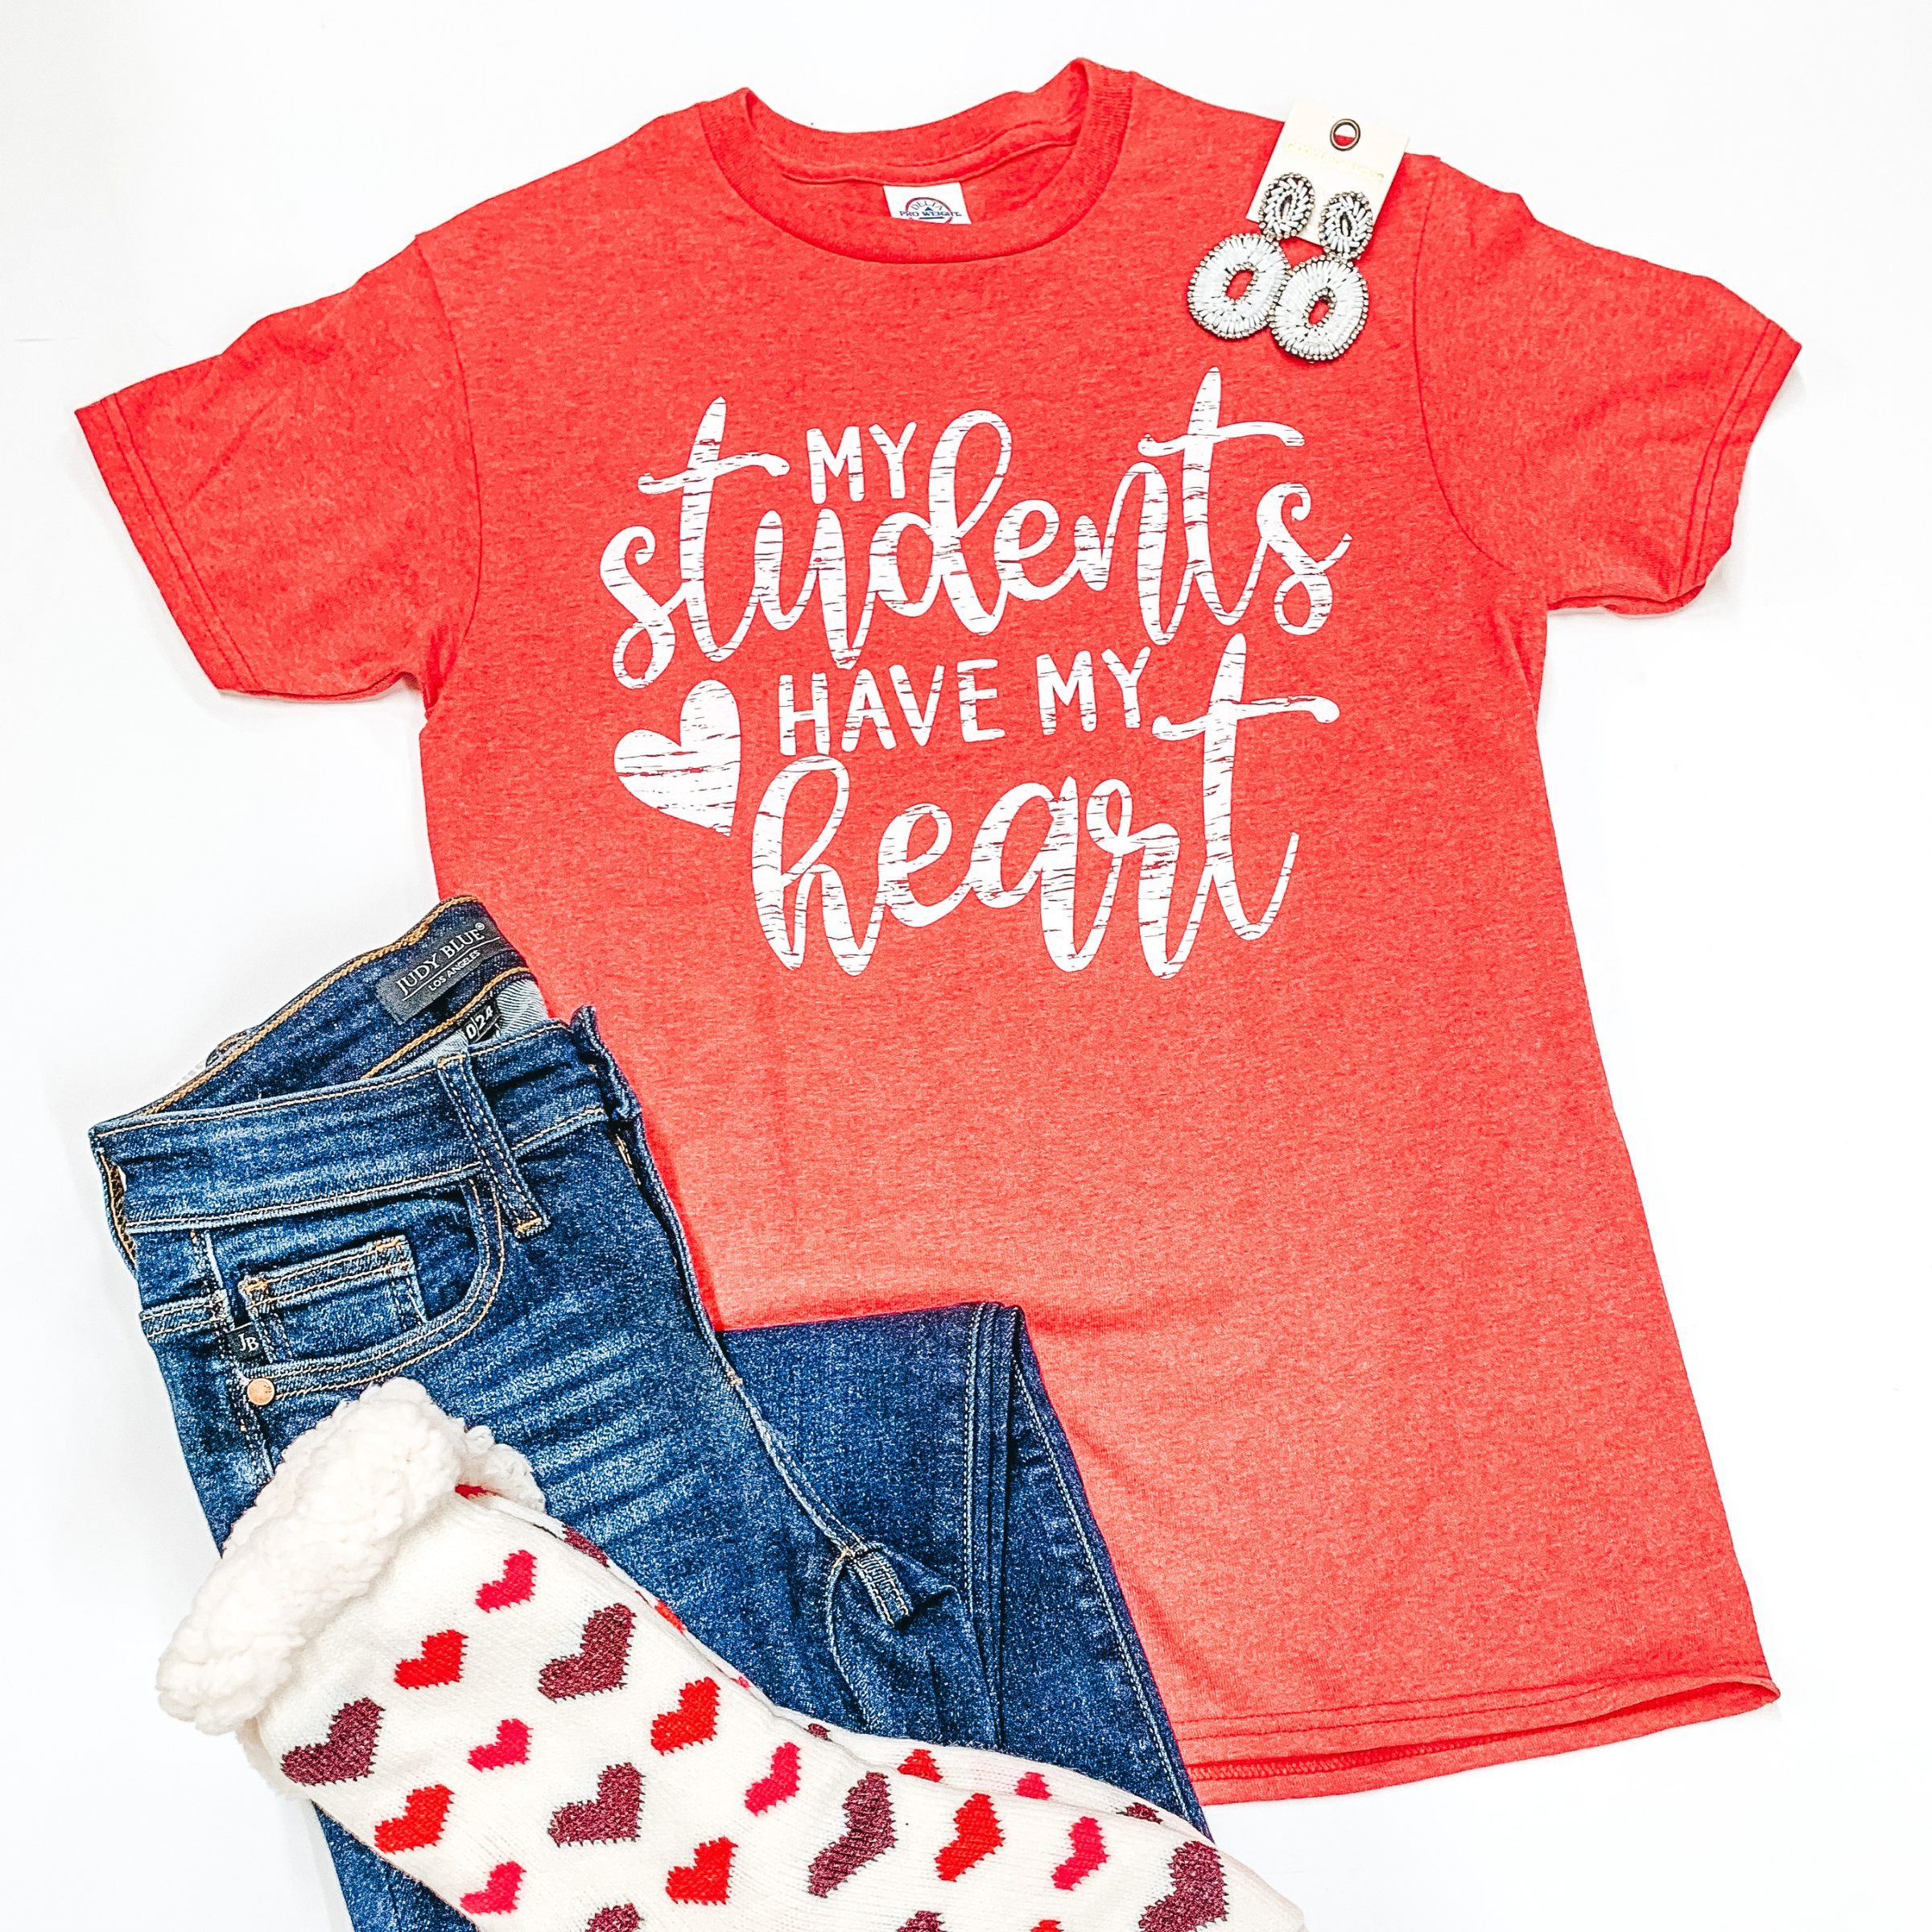 A red tee that says "my students have my heart"  is laid in the middle of the picture. Jeans are laid on the bottom left of the tee and heart socks are laid on top of the jeans. All is on a white background. 